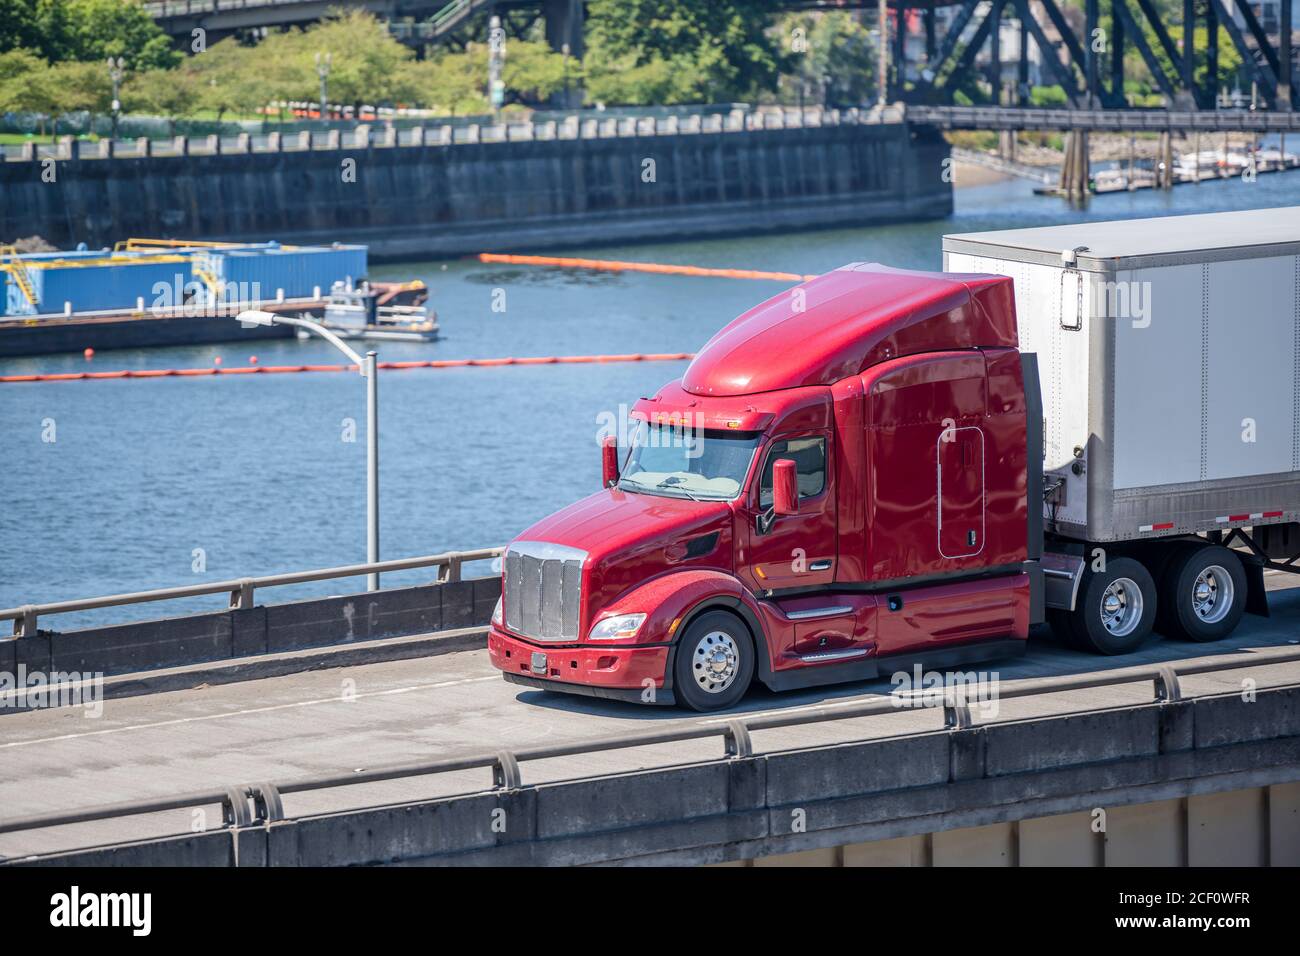 Red industrial grade diesel big rig semi truck with low cab for best aerodynamics transporting commercial cargo in dry van semi trailer running along Stock Photo